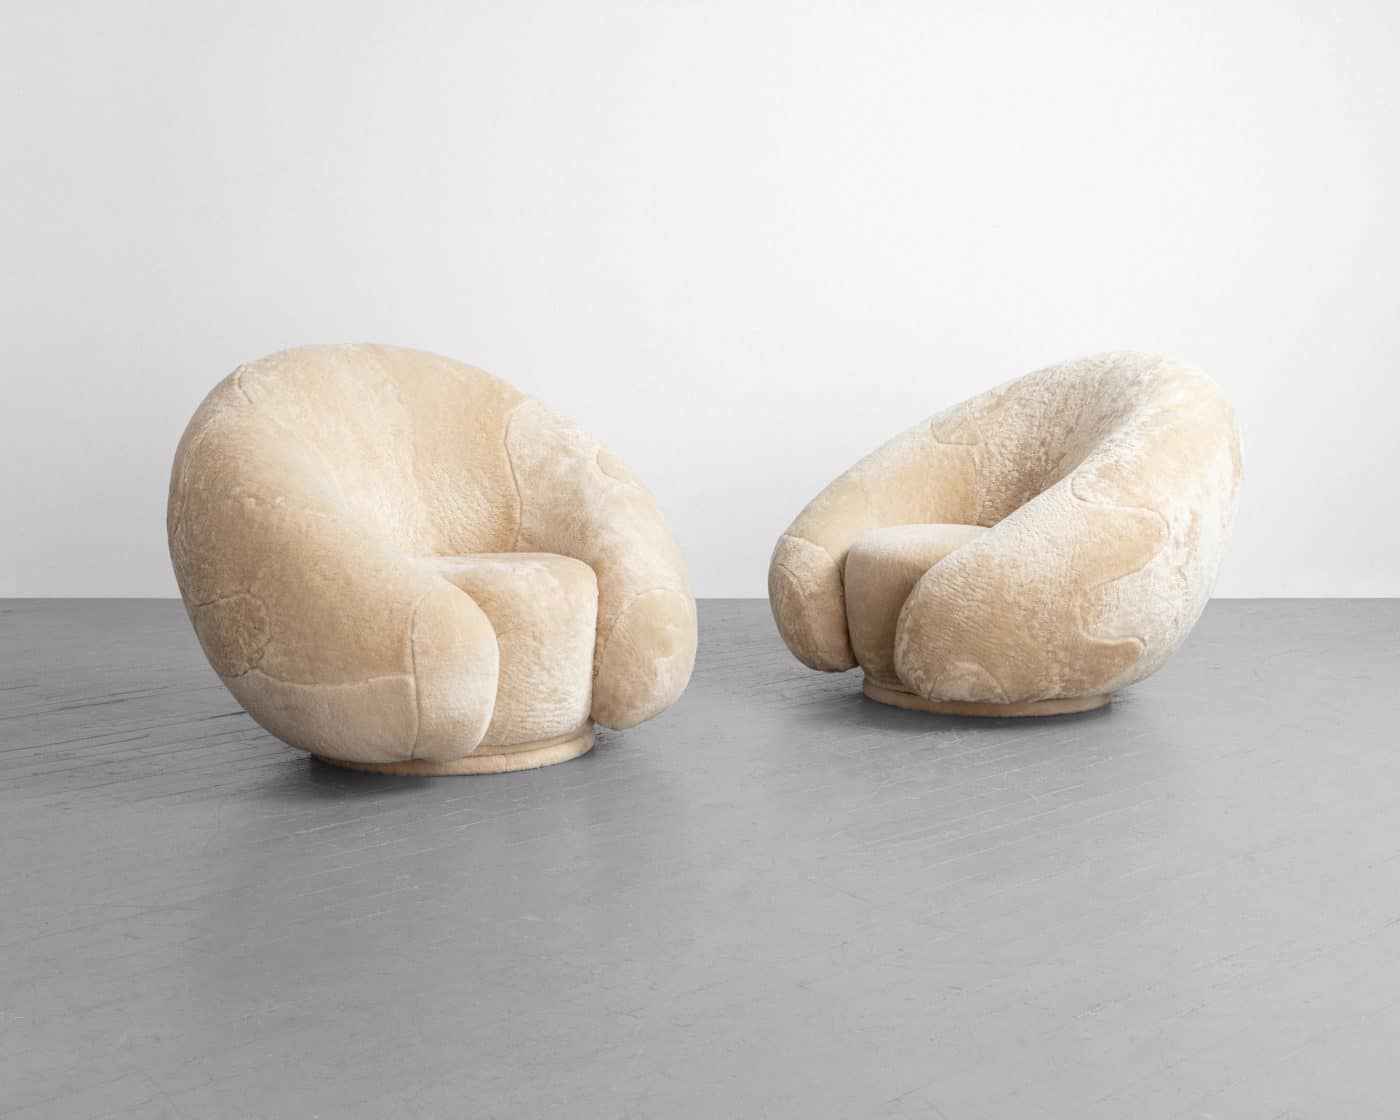 A pair of neutral-toned croissant-shaped lounge chairs by Rogan Gregory